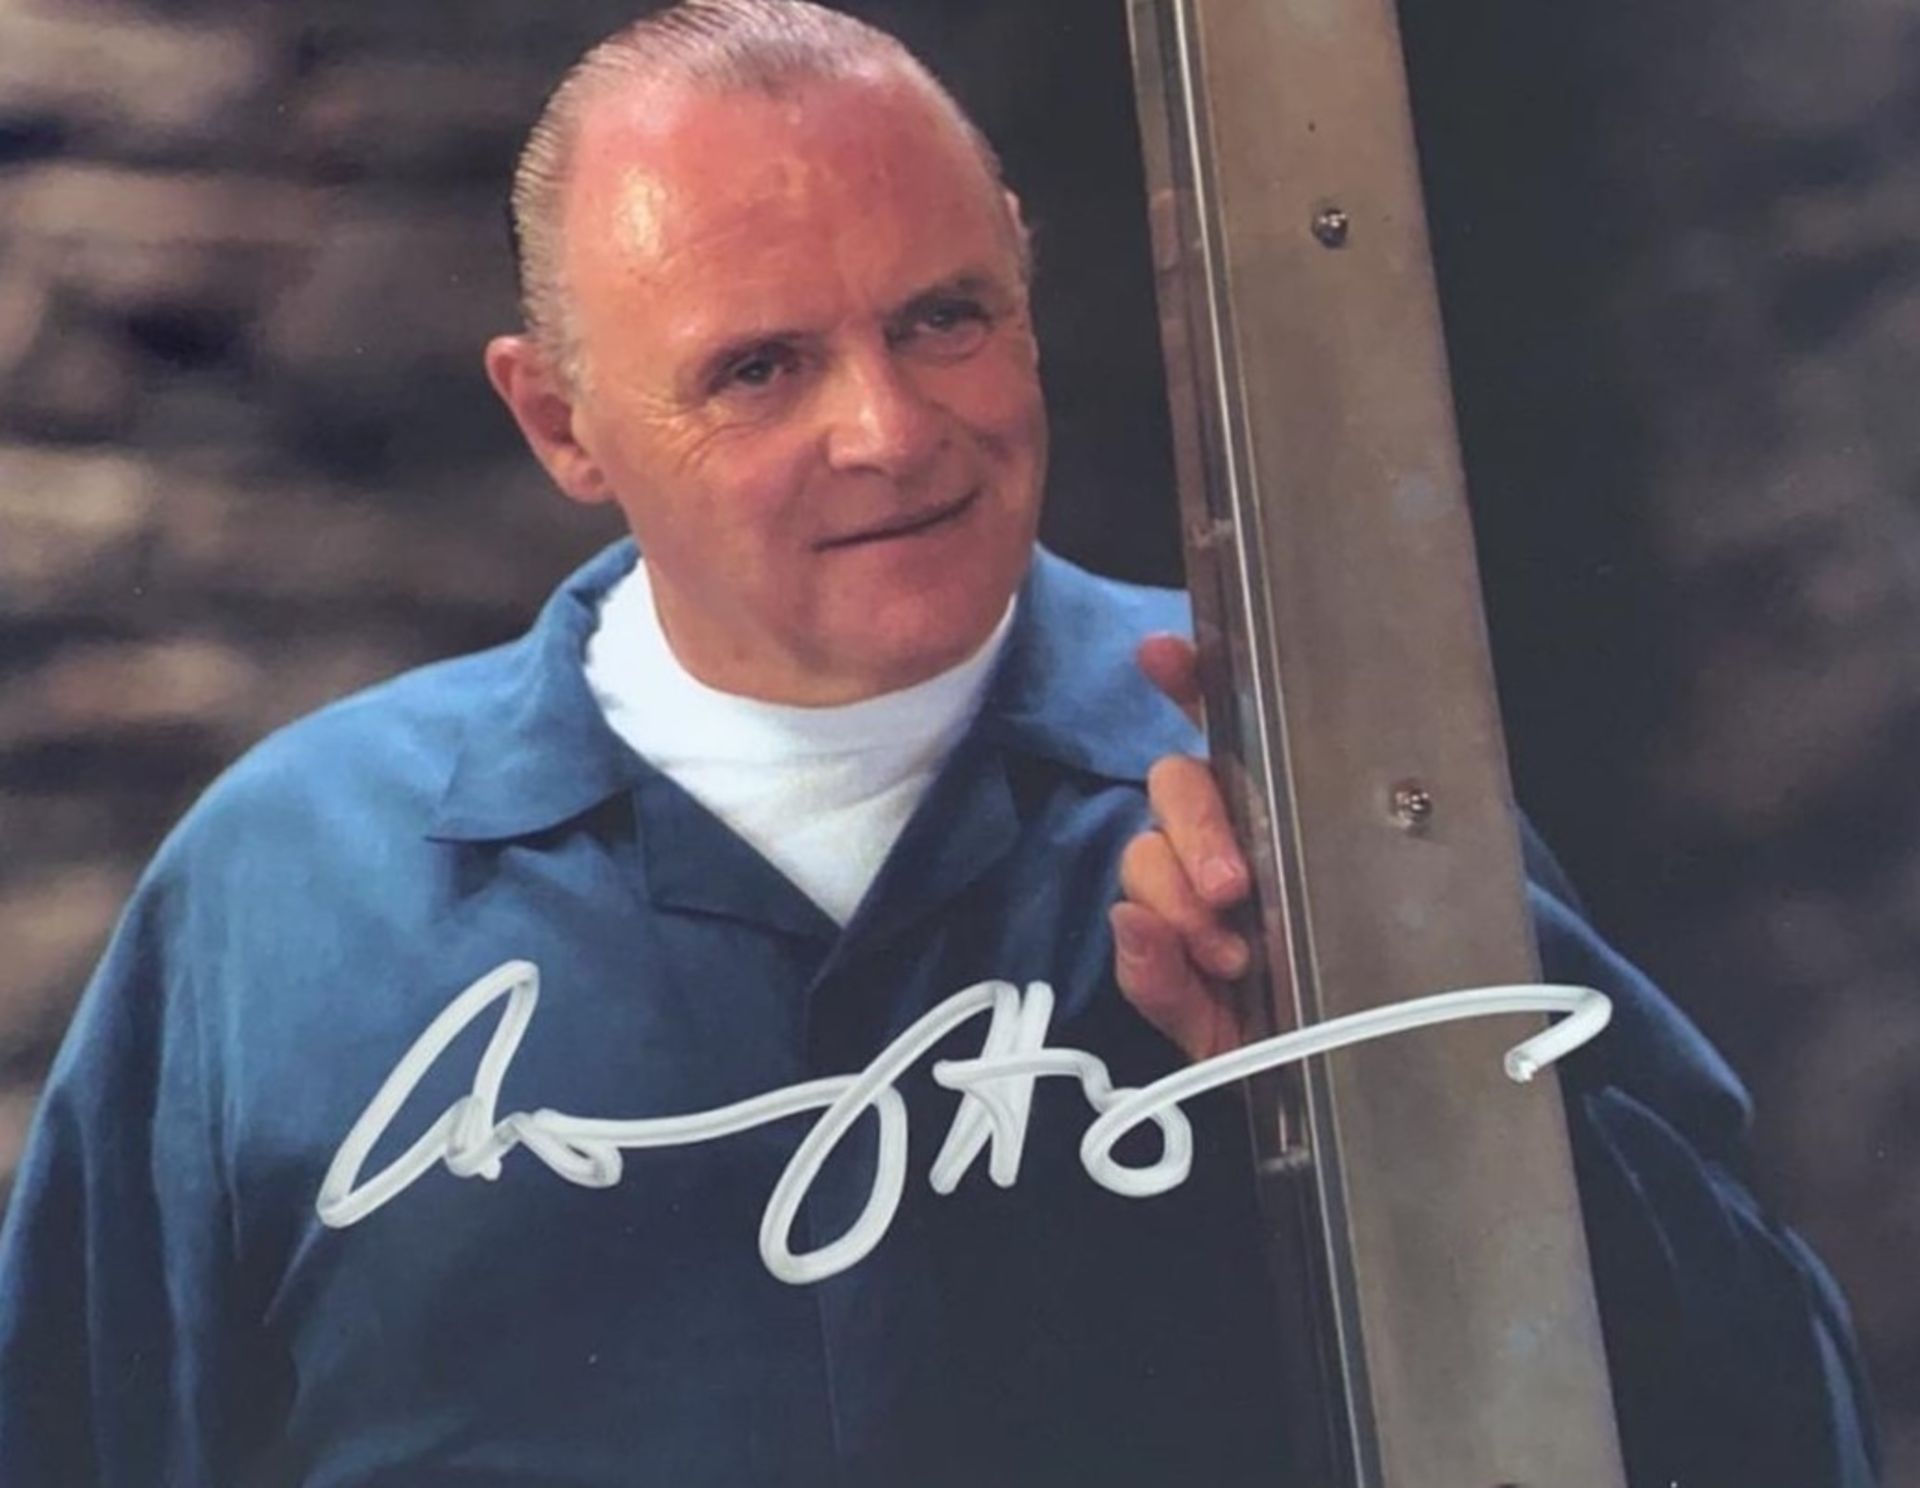 1 x Signed Autograph Picture - ANTHONY HOPKINS HANNIBAL - With COA - Size 12 x 8 Inch - CL590 -